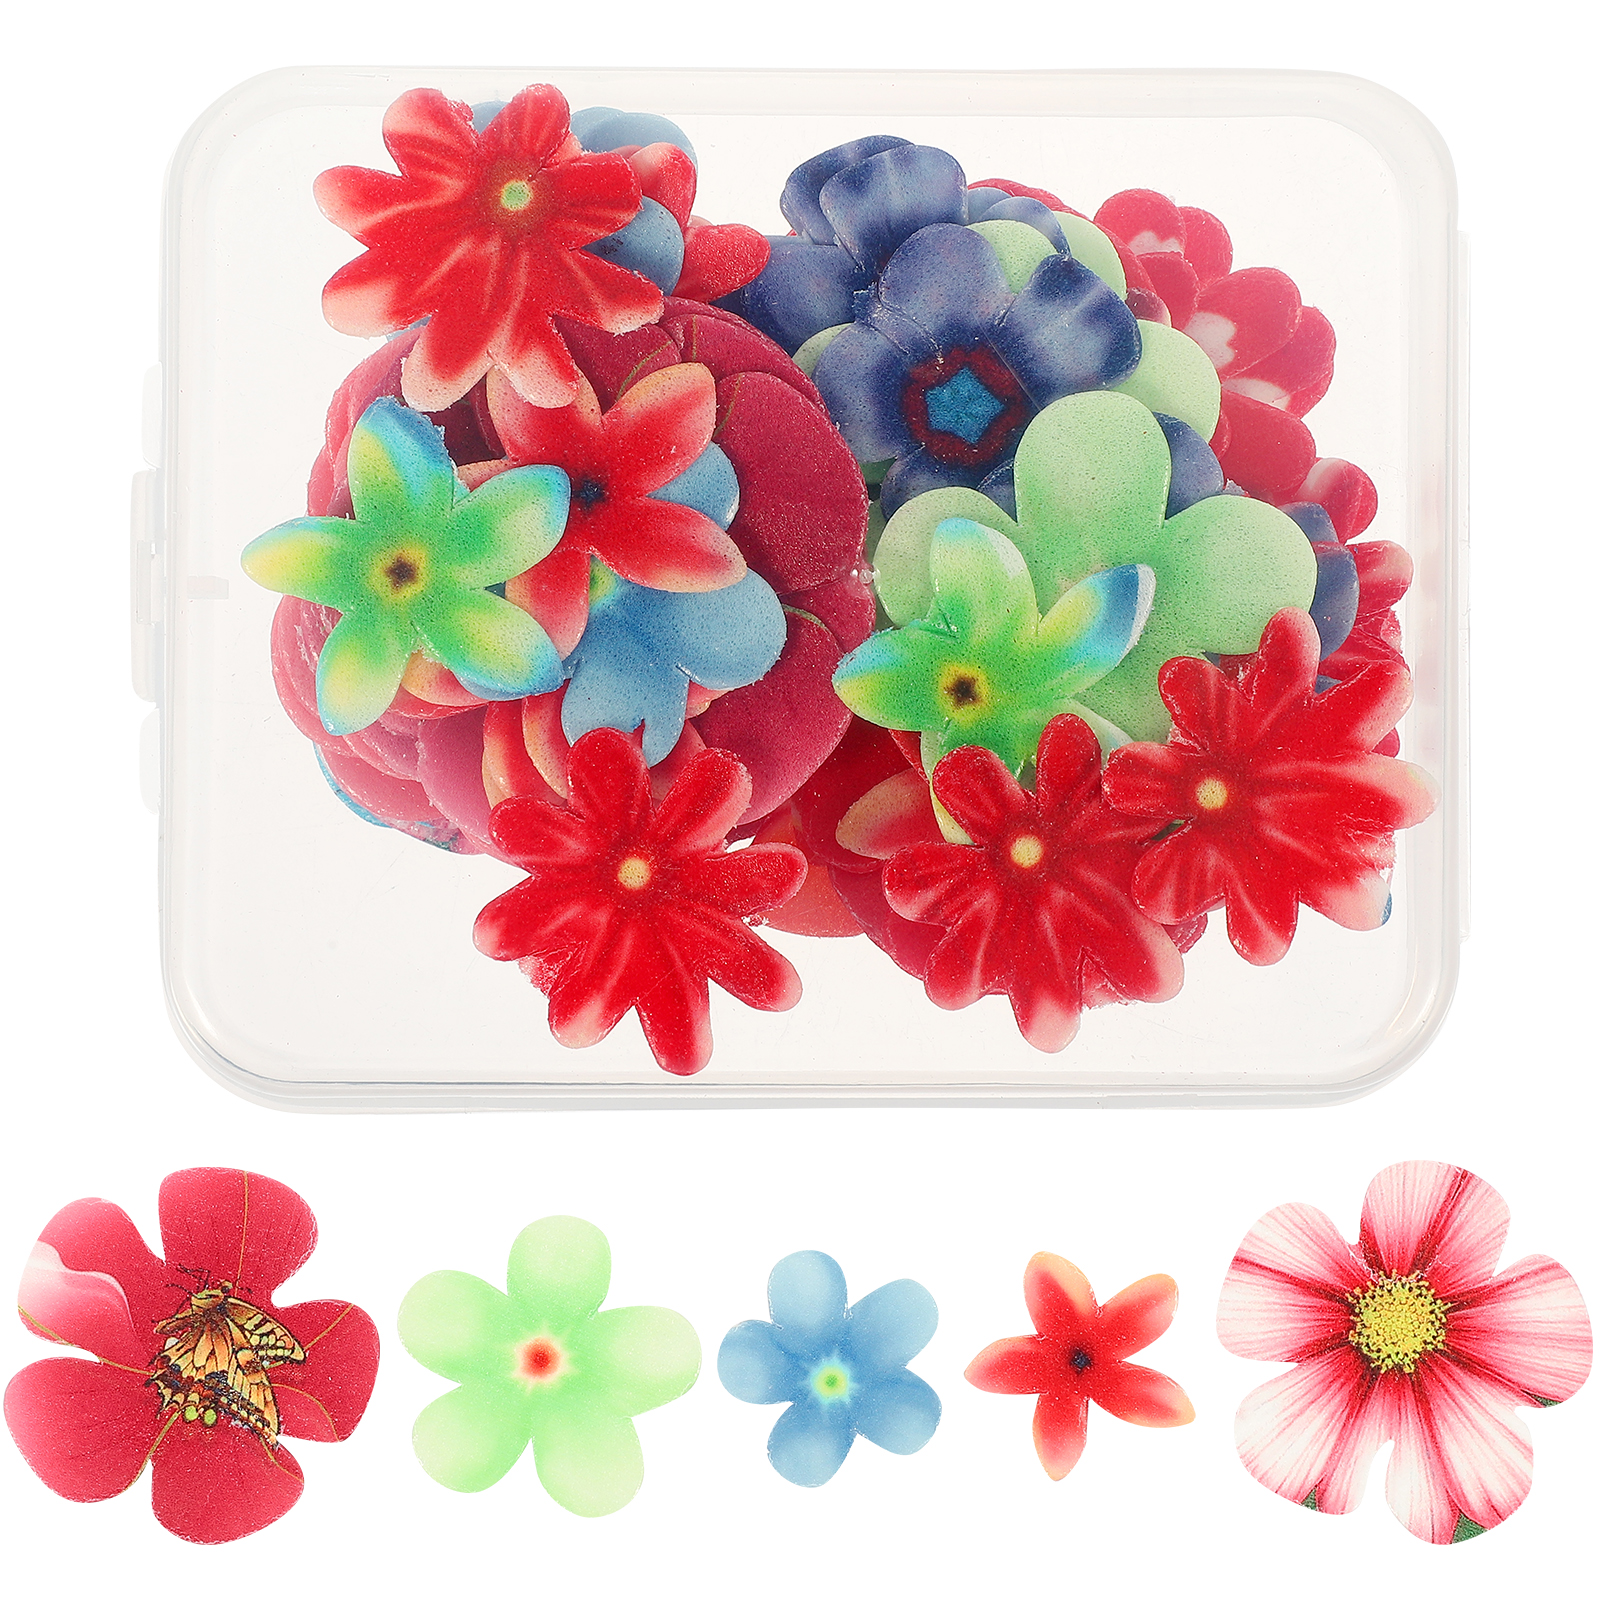 Edible Flowers for Cakes 1 Box of Edible Flowers for Cake Decorative Rice Paper Flowers Edible Cake Decors Cupcake Toppers, Women's, Size: 15x12x3CM